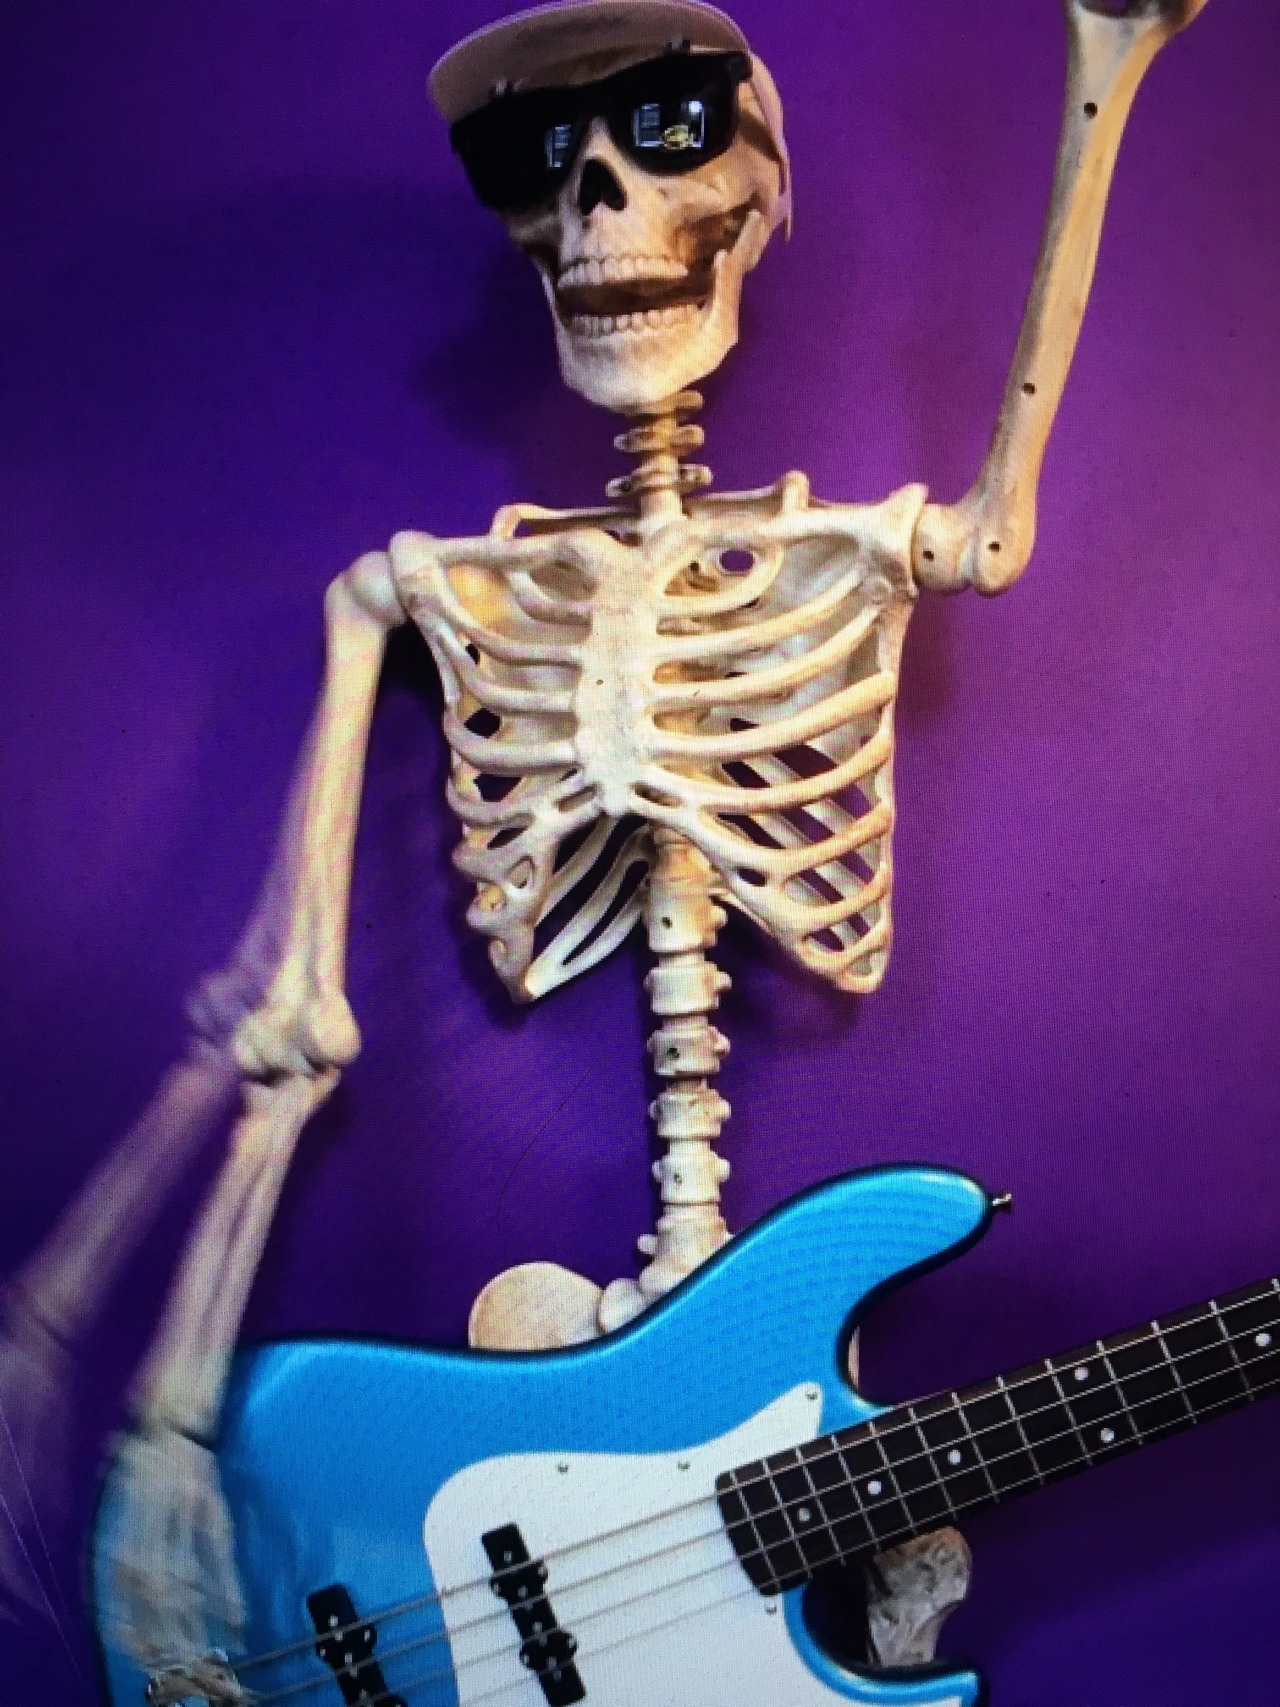 It’s Friday. Here’s a skeleton. Click and hold for some action.